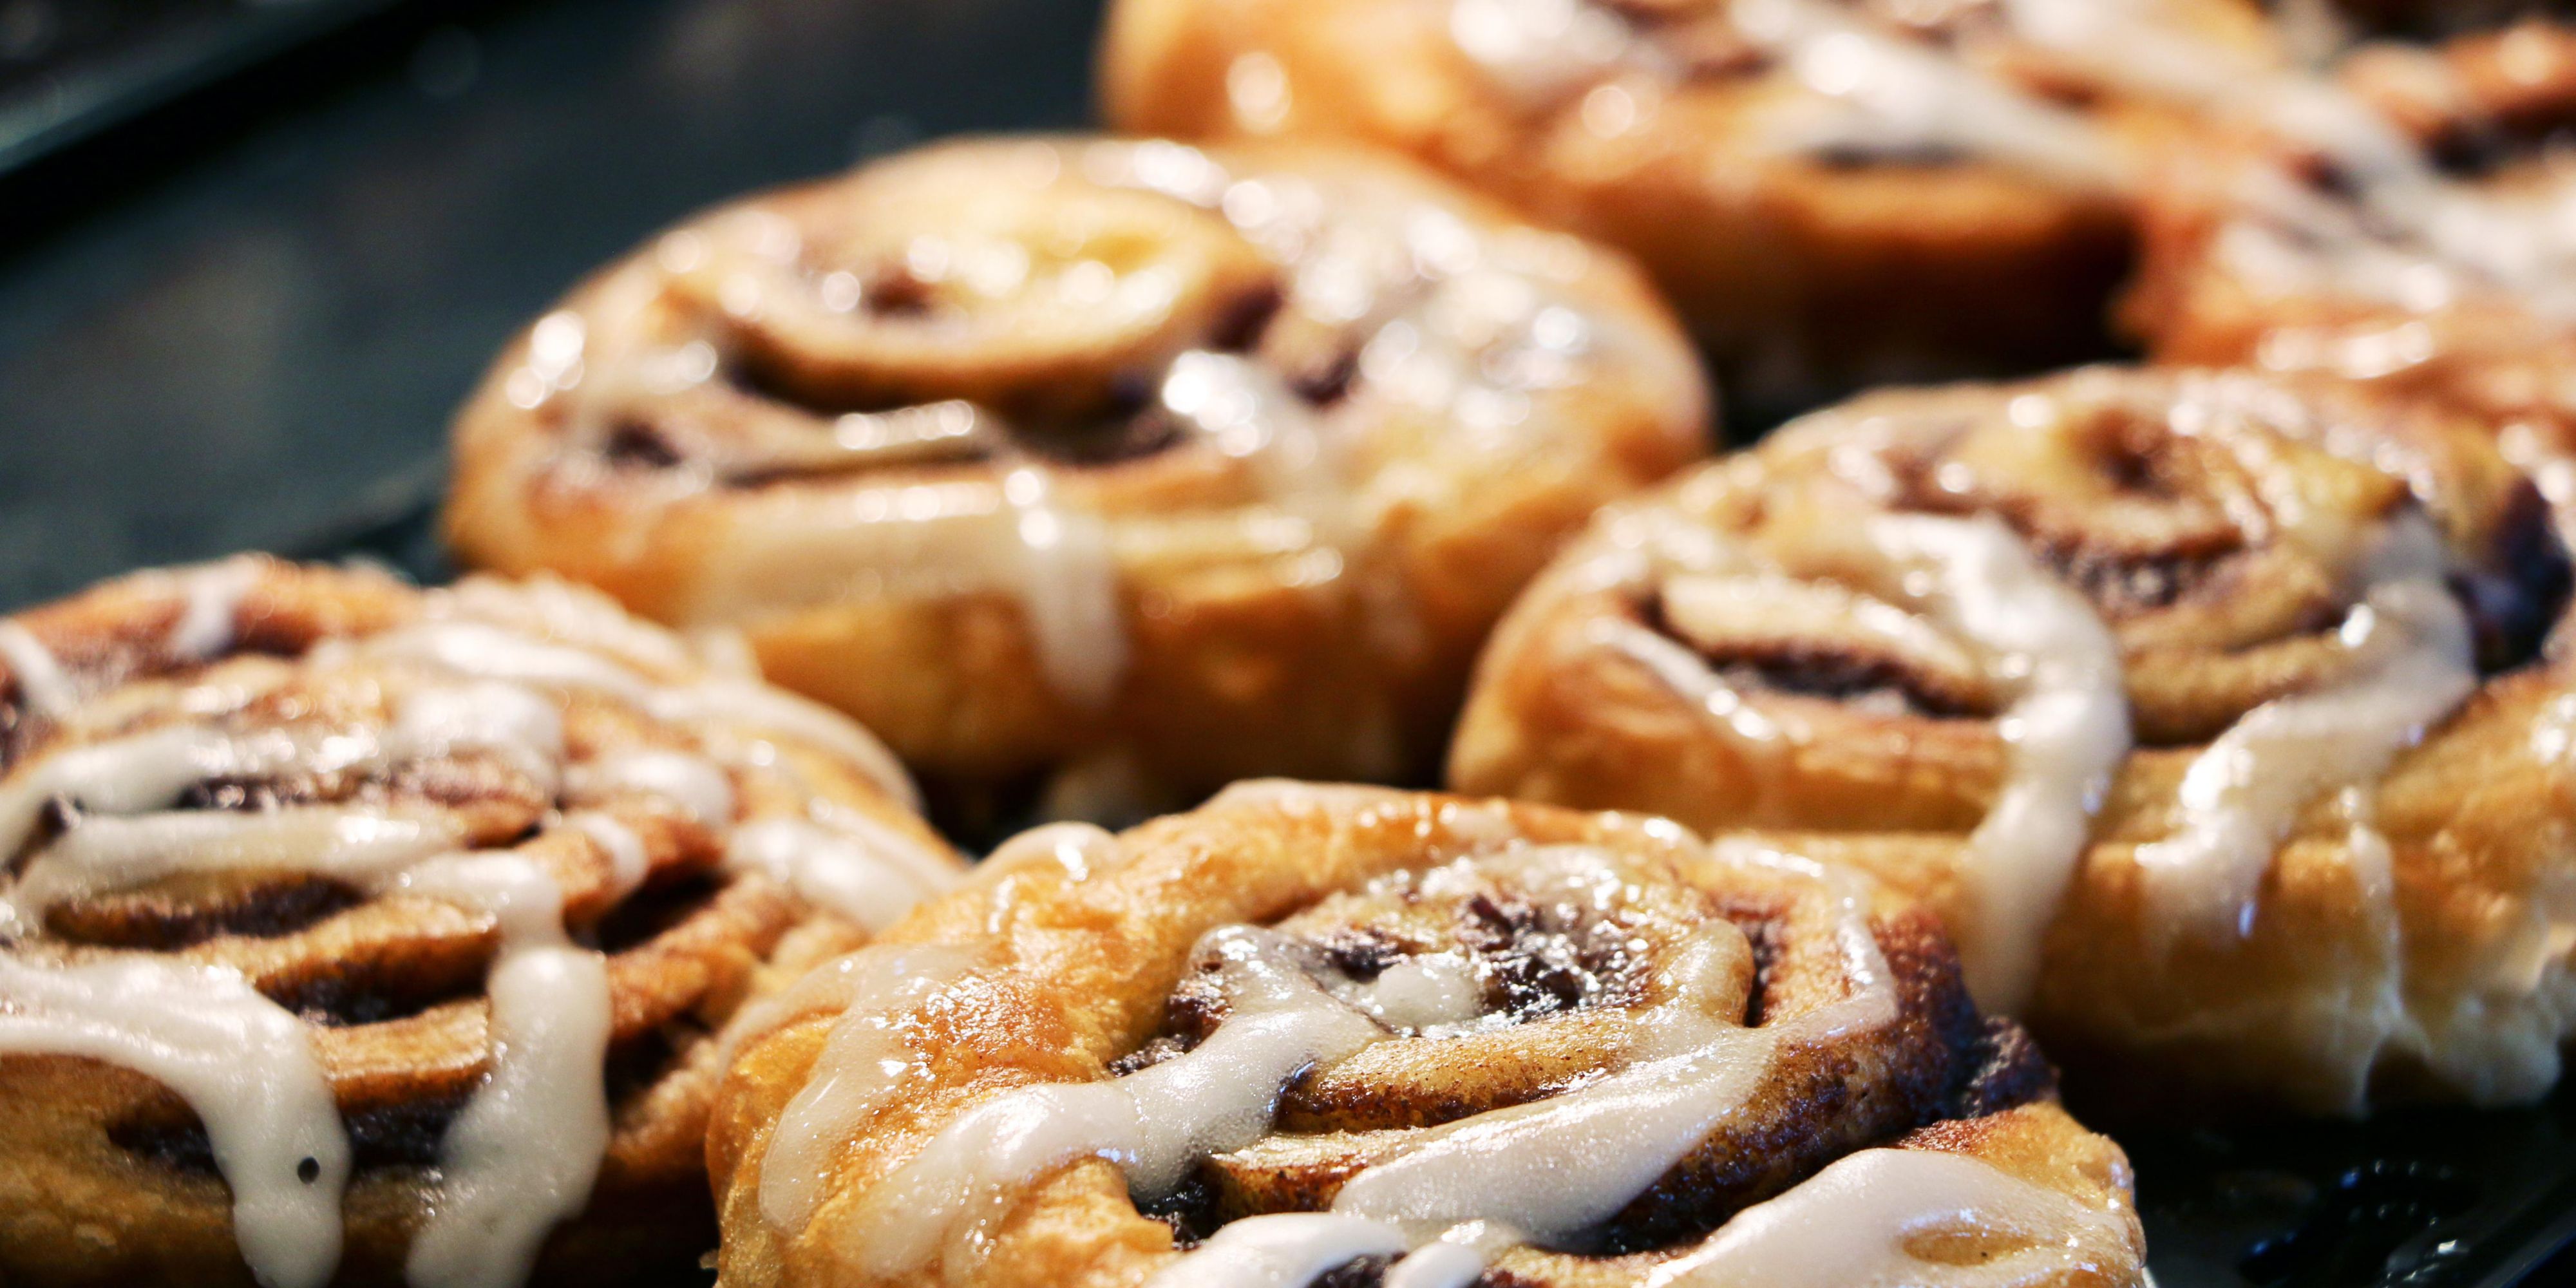 We offer a free hot breakfast to start your day and delicious cinnamon rolls are one of our proudest highlights.